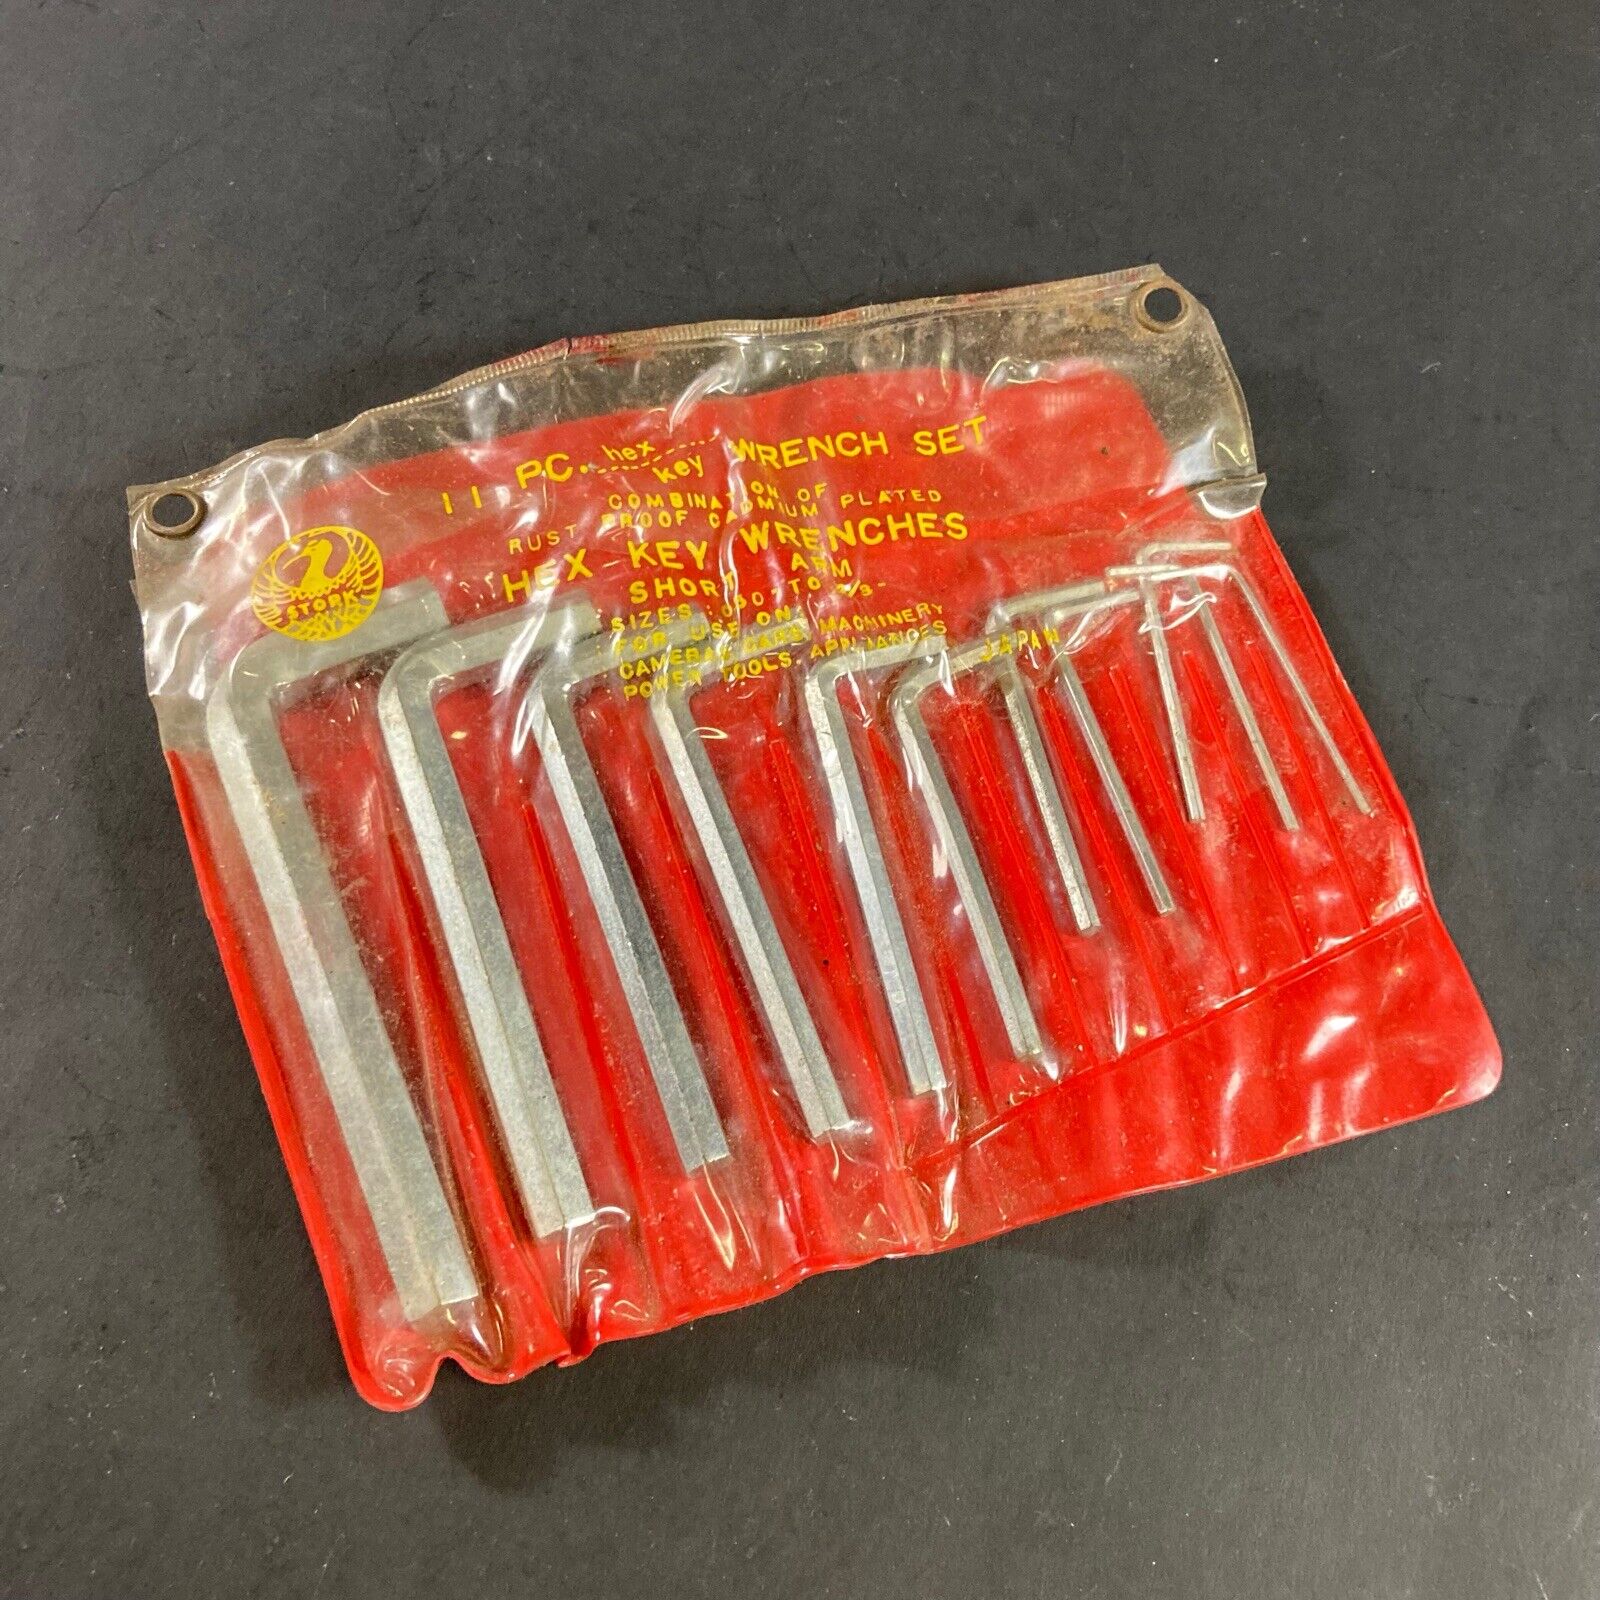 NEW OLD STOCK VINTAGE \'STORK\' 11PC HEX KEY WRENCH SET 050-3/8 MADE IN JAPAN